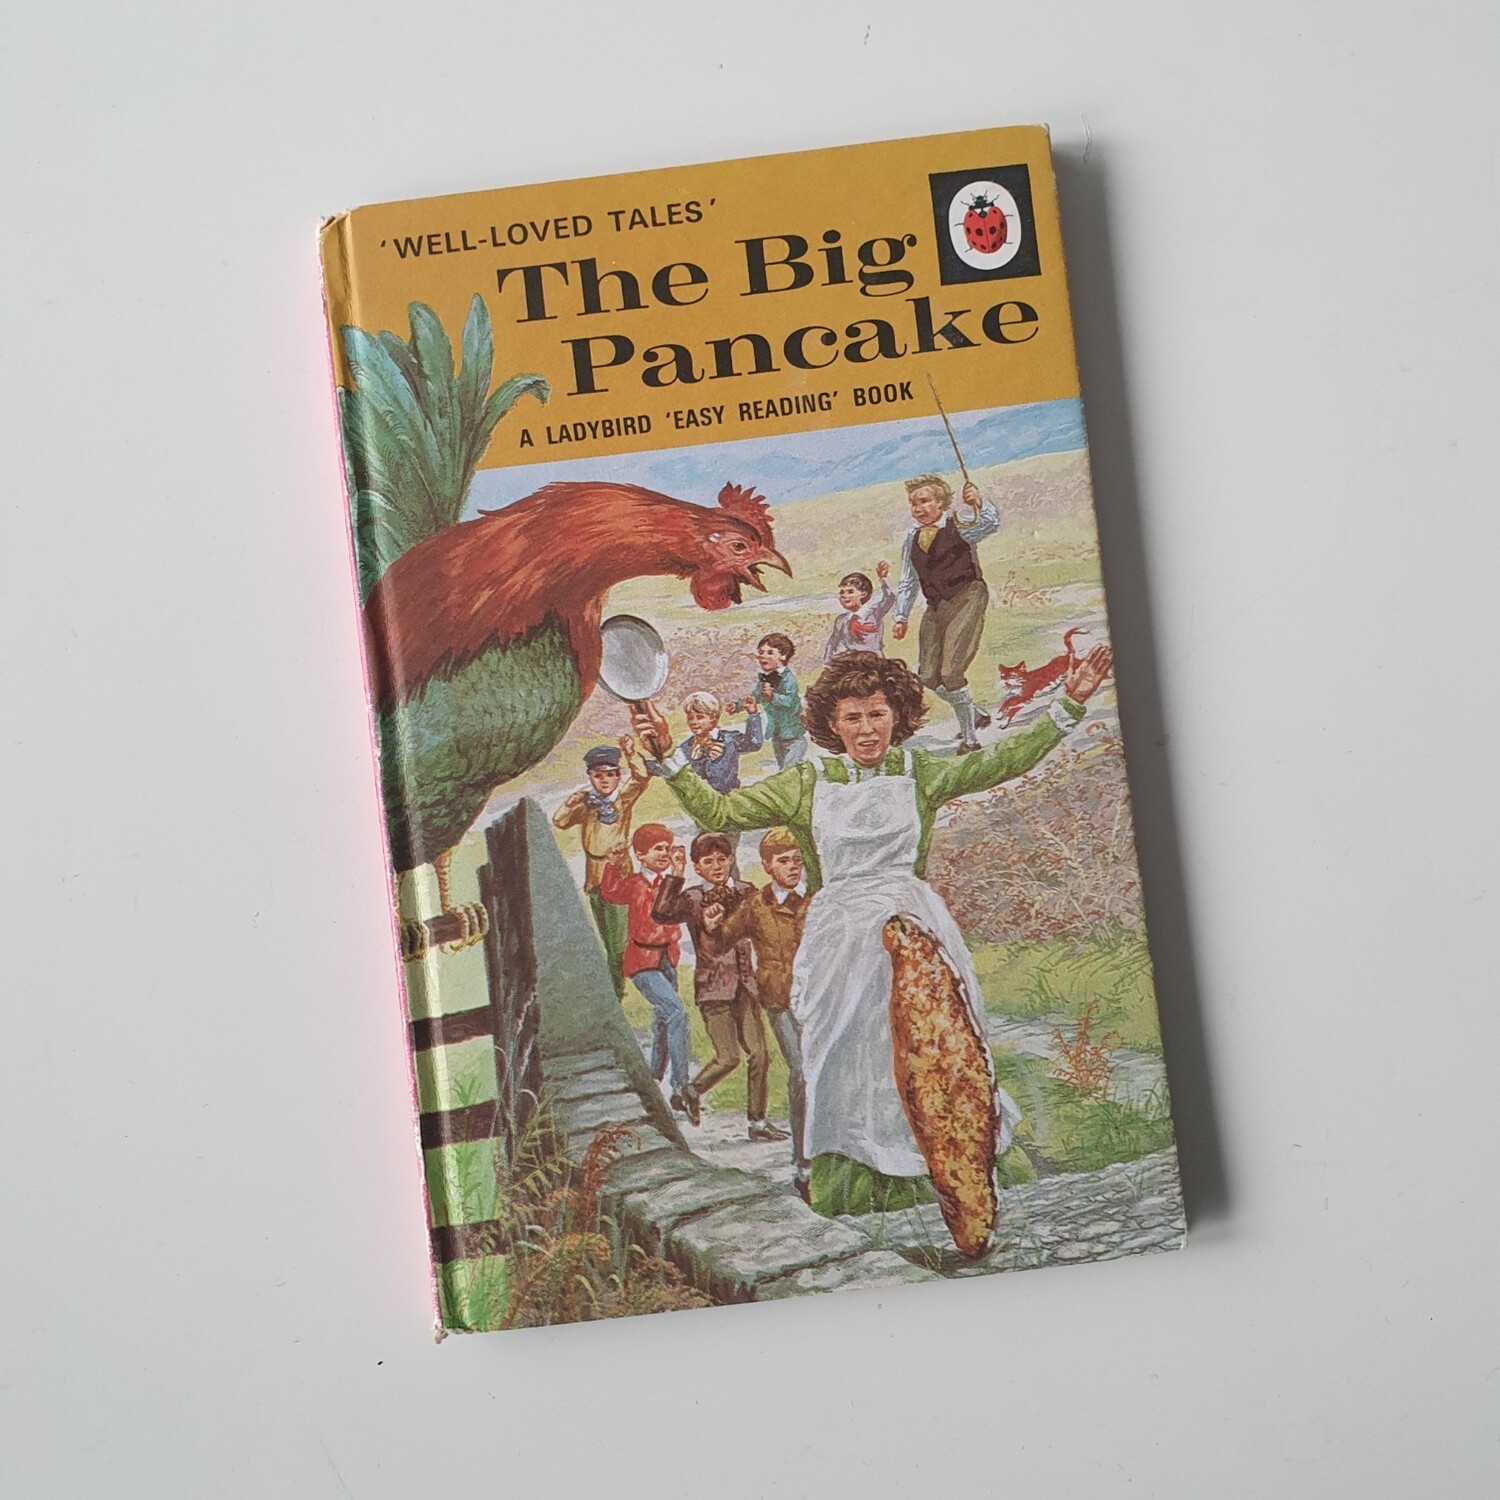 The Big Pancake Notebook - Ladybird book - well loved tales